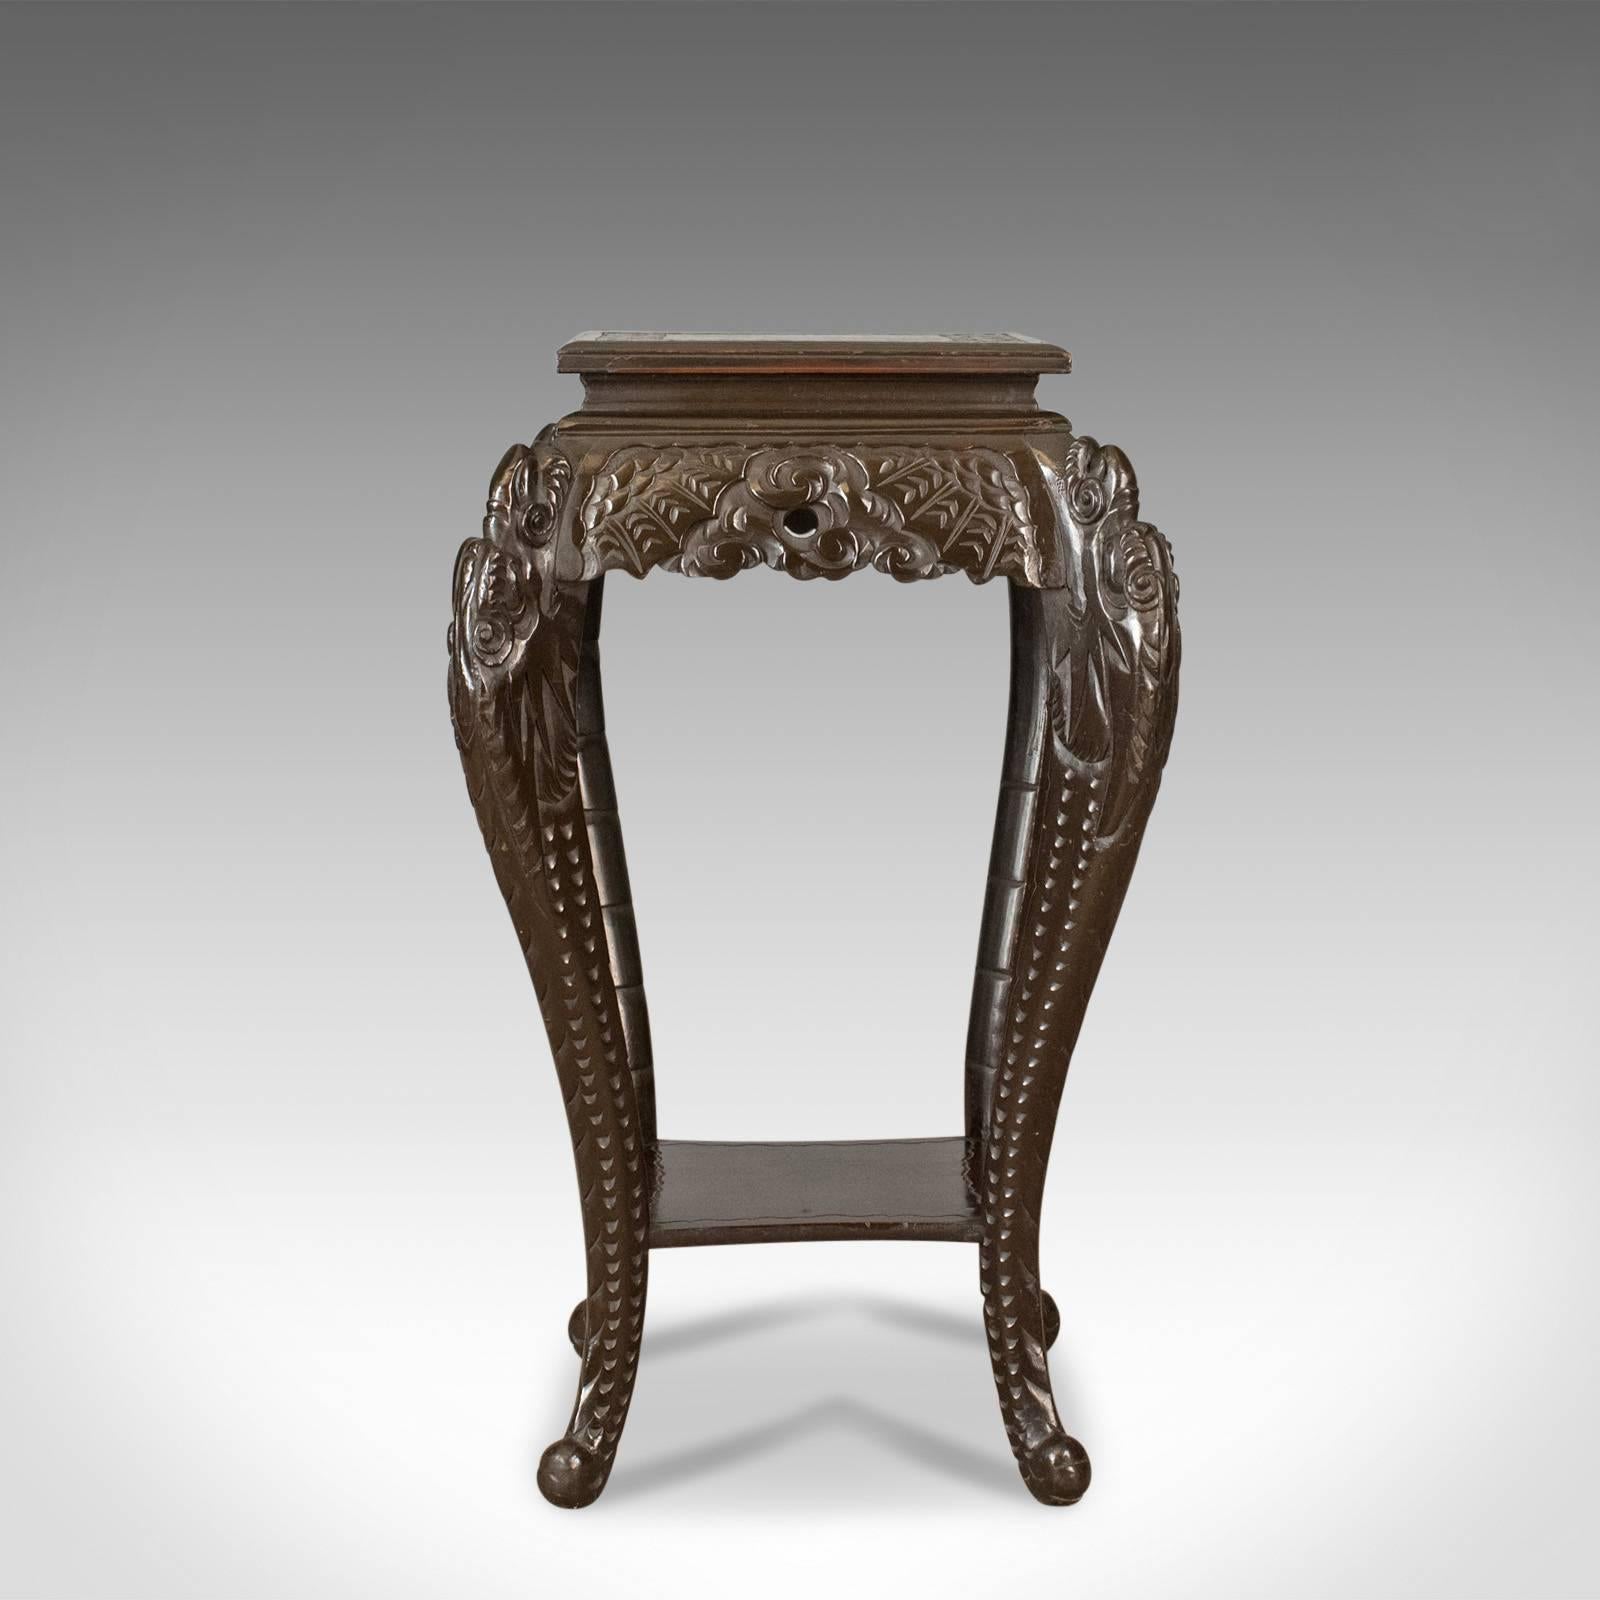 This is an antique plant stand, a carved Chinese side table, torchere or pedestal in hardwood dating to the early 20th century, circa 1910.

Profusely carved with a dark, wax, polished finish
Classic oriental styling in good proportion
Useful